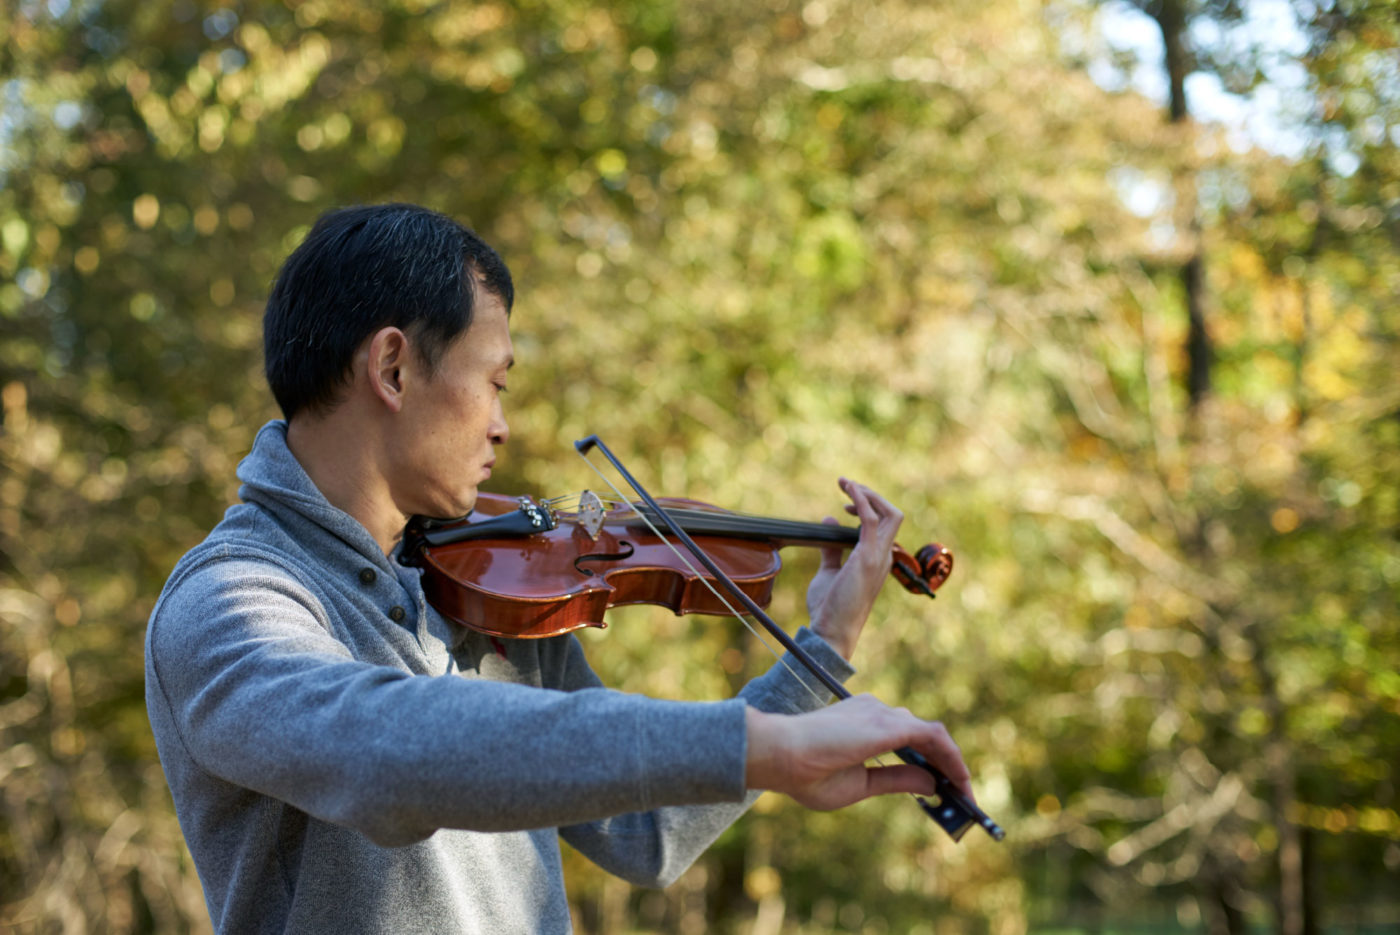 A man in a gray sweater plays the violin outside near the woods.